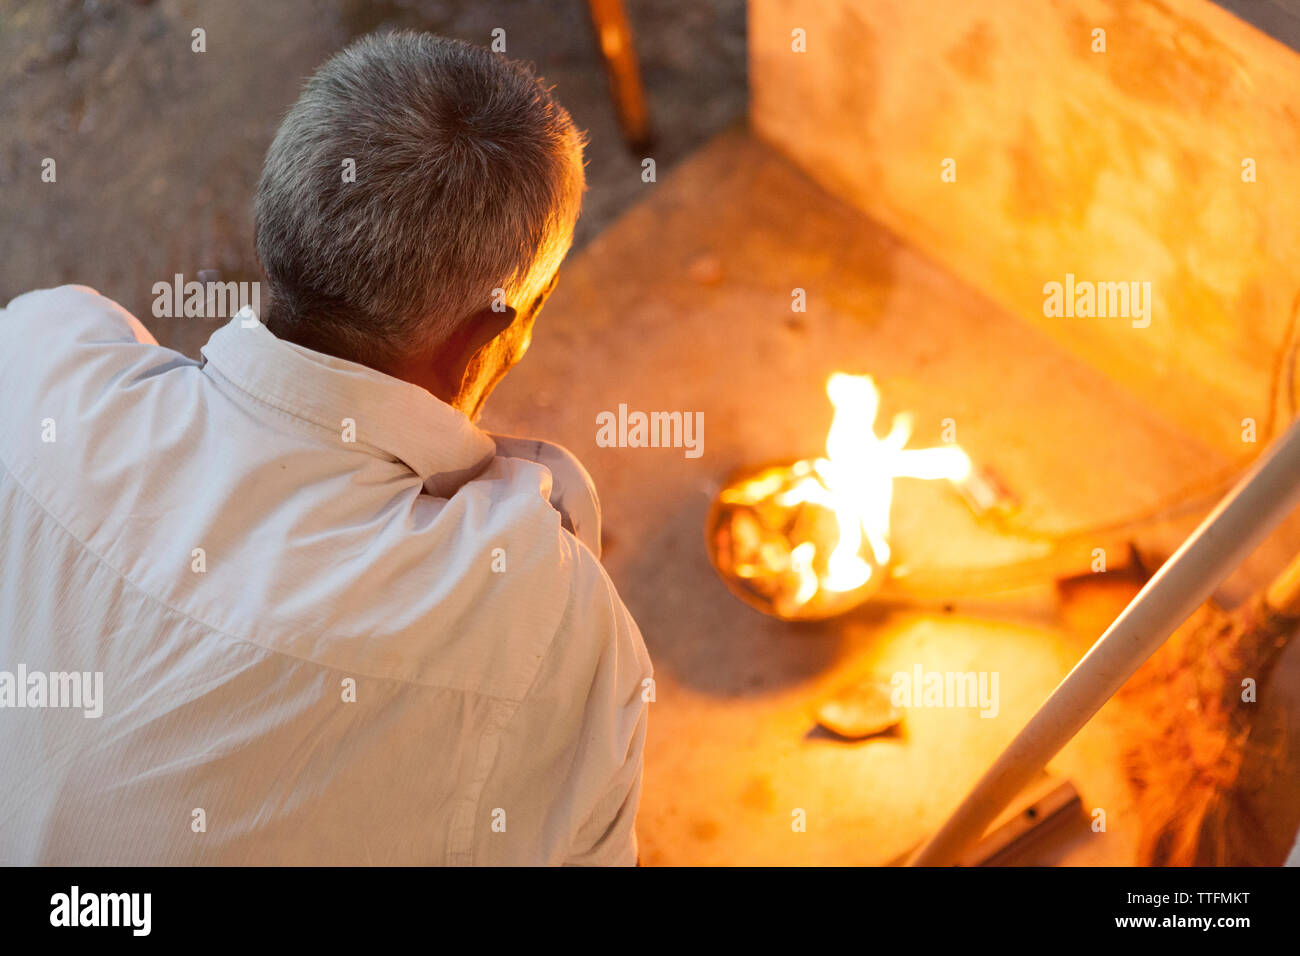 Old man in front of a small fire, Sri Lanka Stock Photo